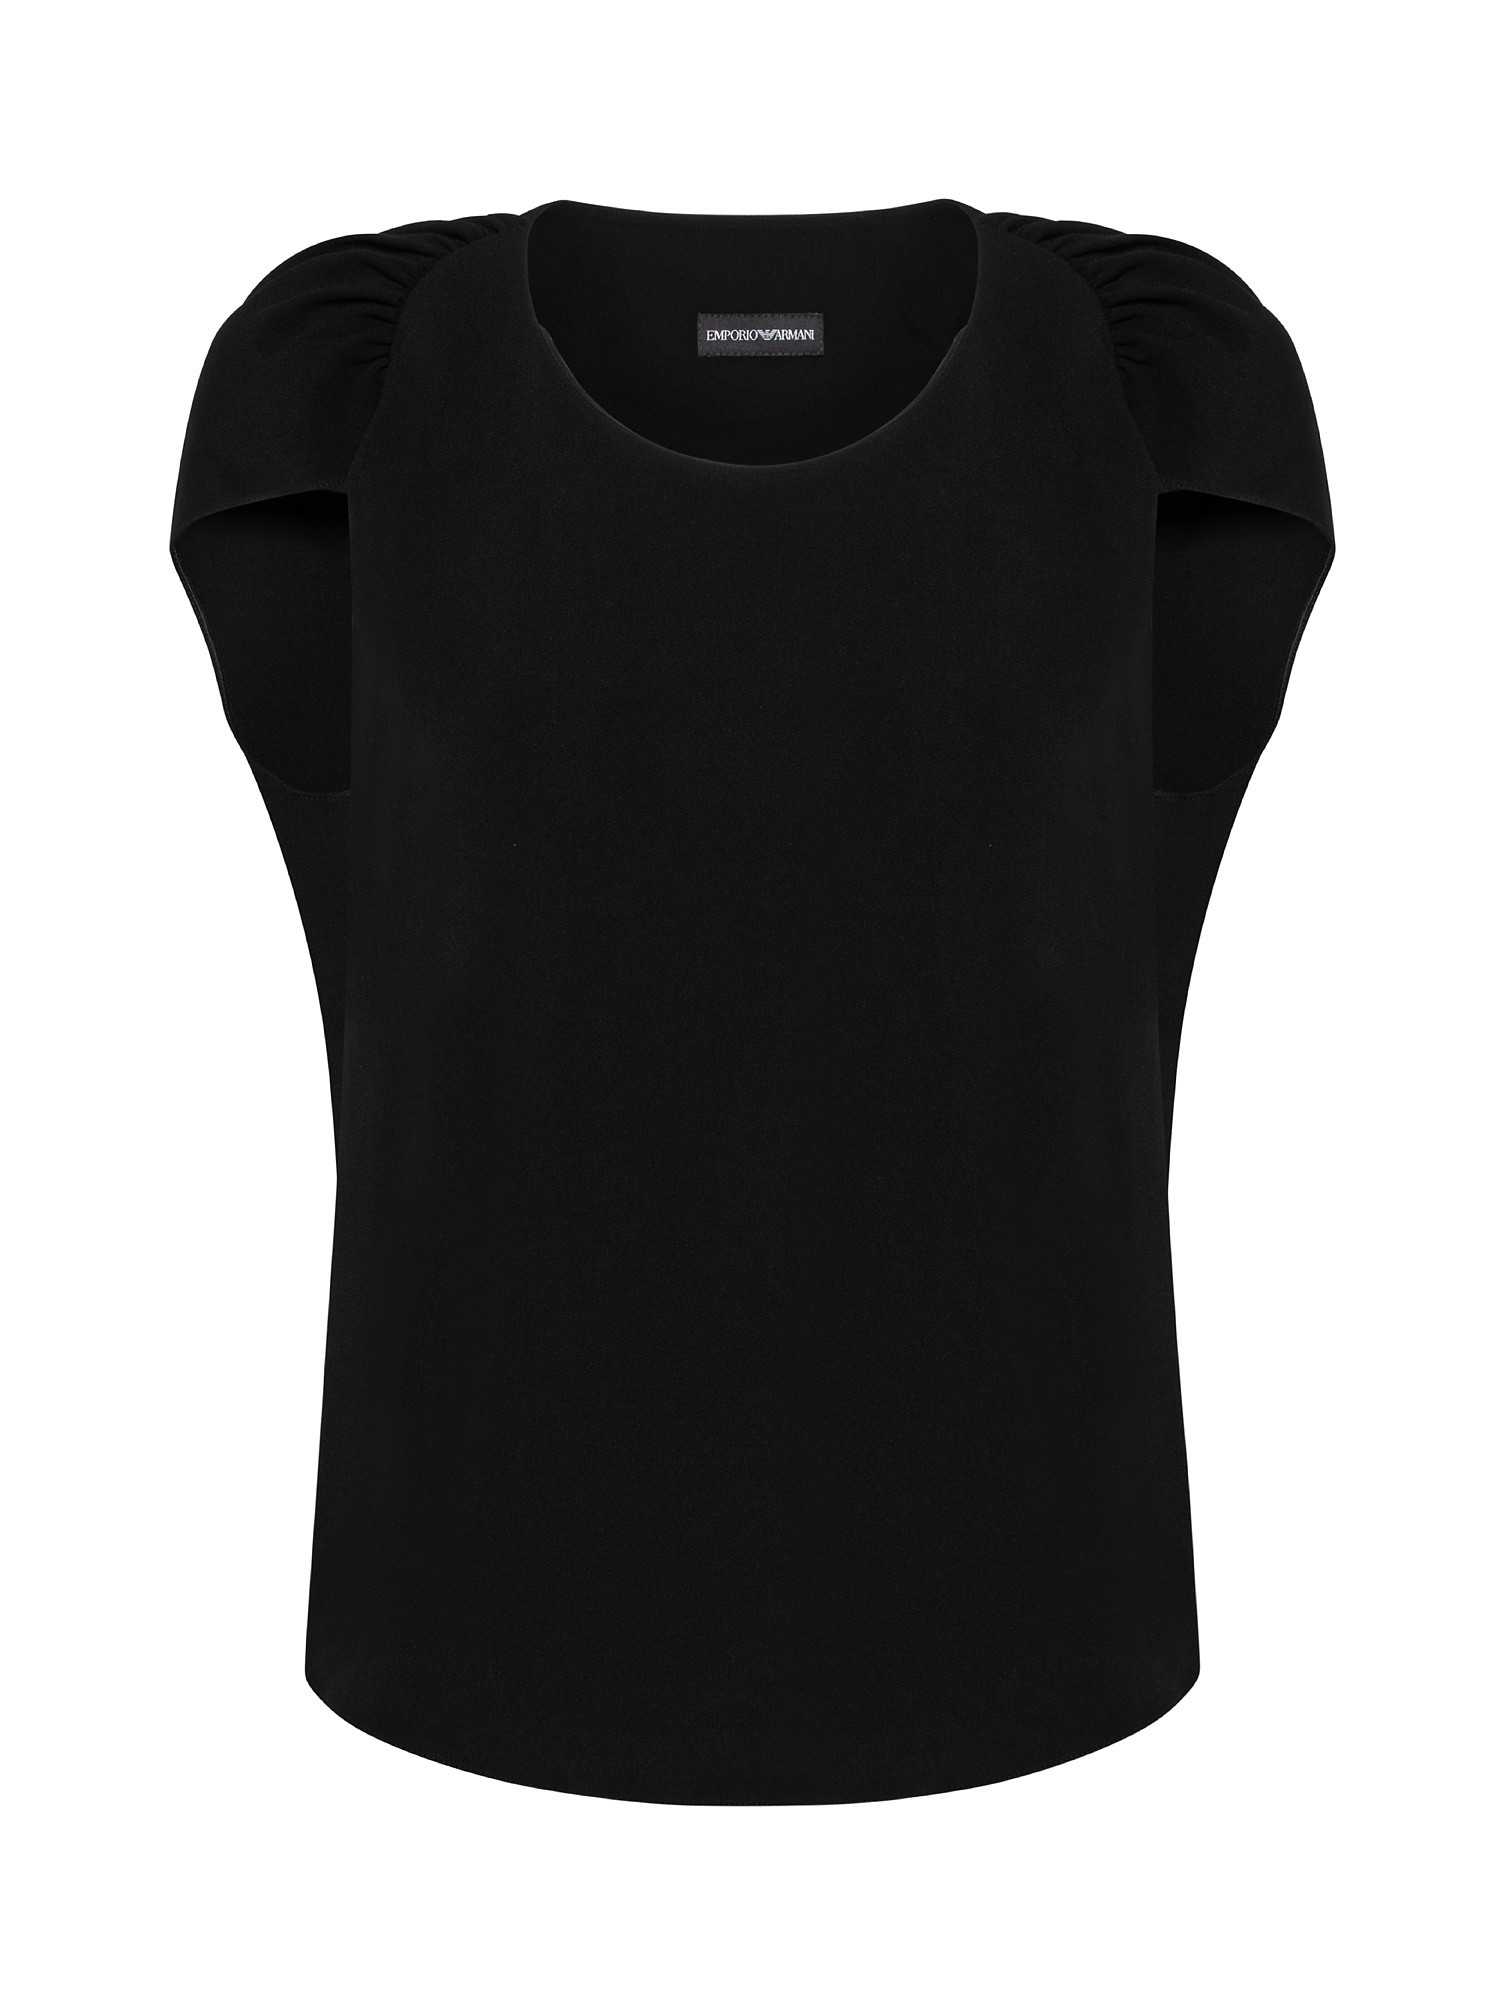 Top with ruffle sleeves, Black, large image number 0